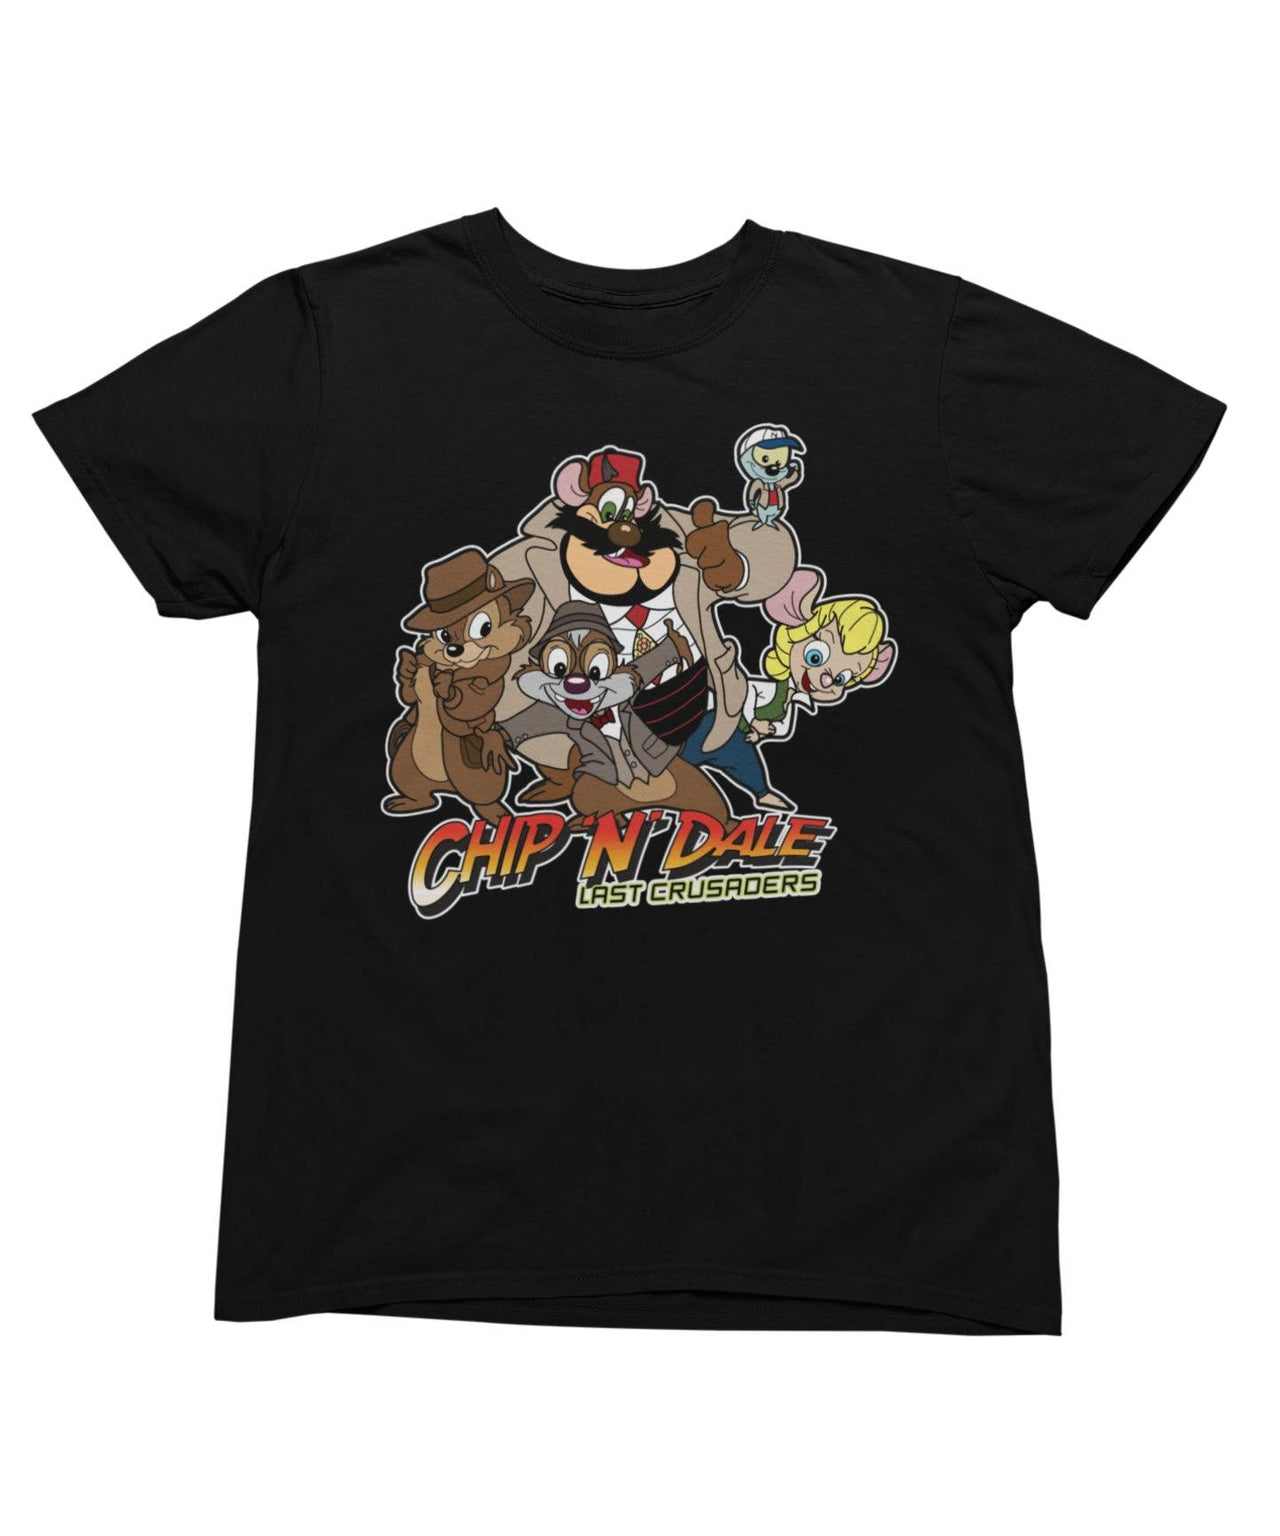 Top Notchy Chip N Dale Last Crusaders Men's/Unisex Mens Graphic T-Shirt 8Ball